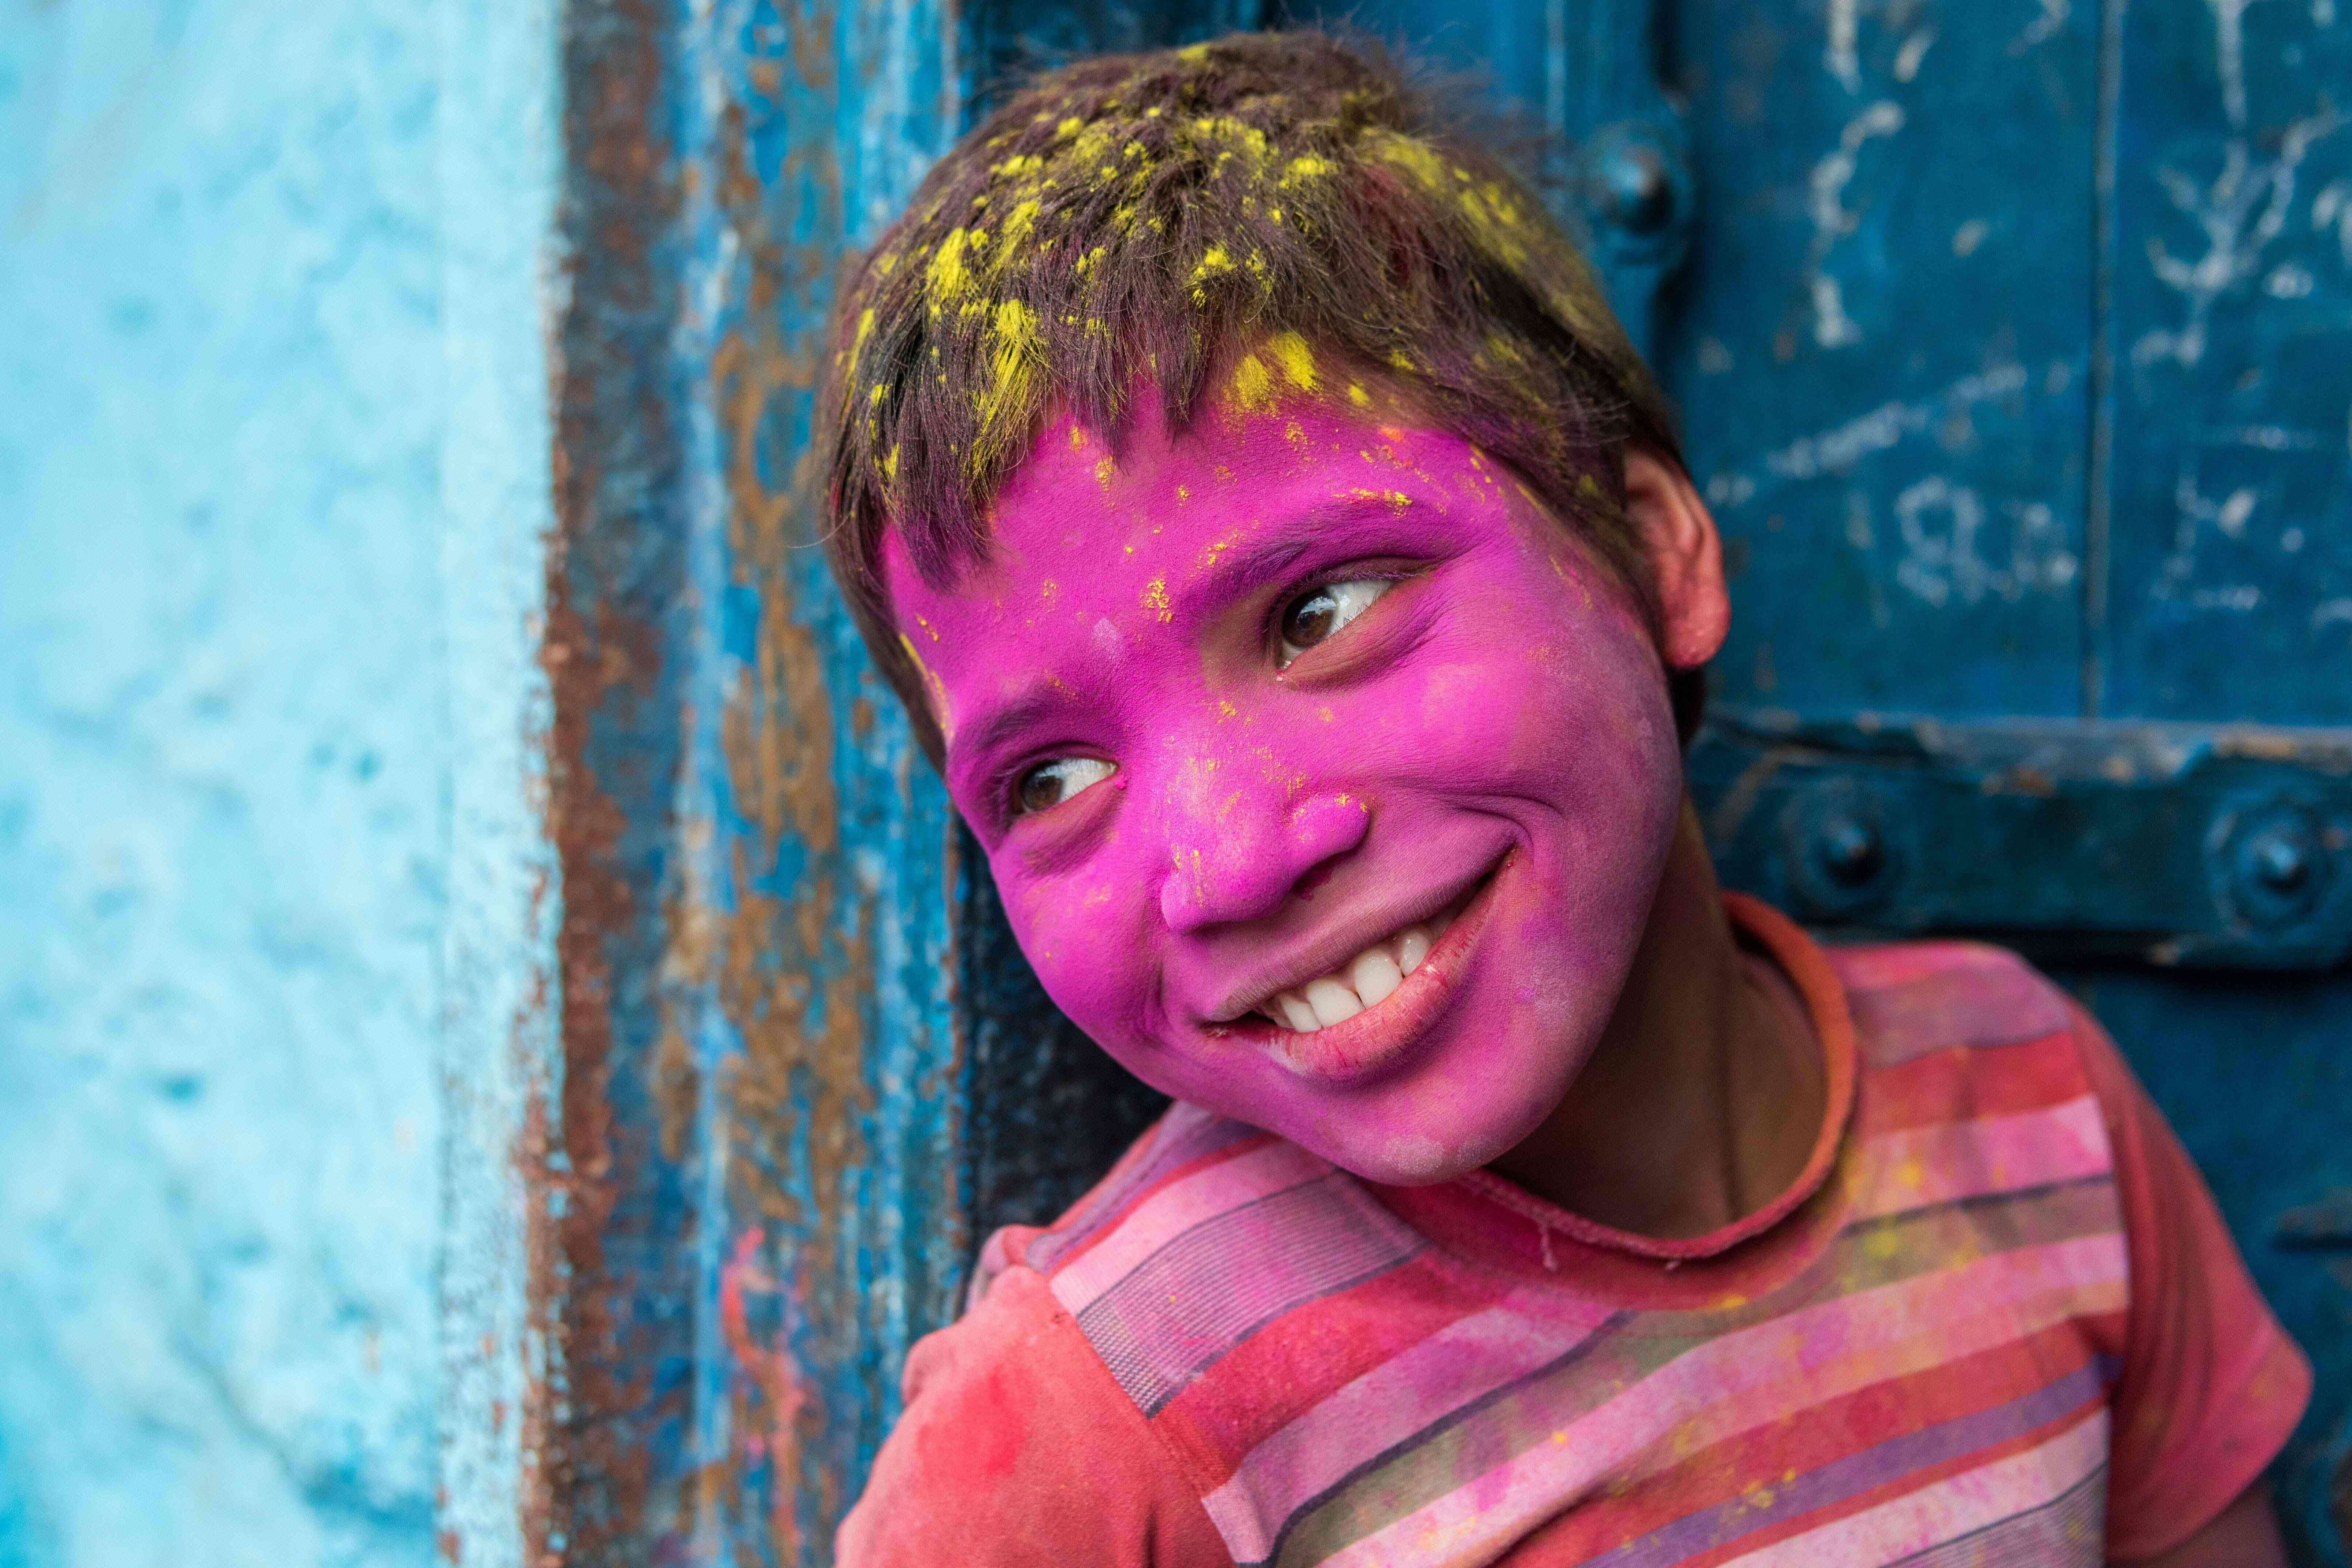 A young Indian reveller covered in coloured powder poses during the Lathmar Holi celebrations in the village of Barsana on March 17, 2016. holi, also called the Festival of Colours, is a popular Hindu spring festival observed in India at the end of the winter season on the last full moon day of the lunar month. / AFP PHOTO / FRANCOIS XAVIER MARIT